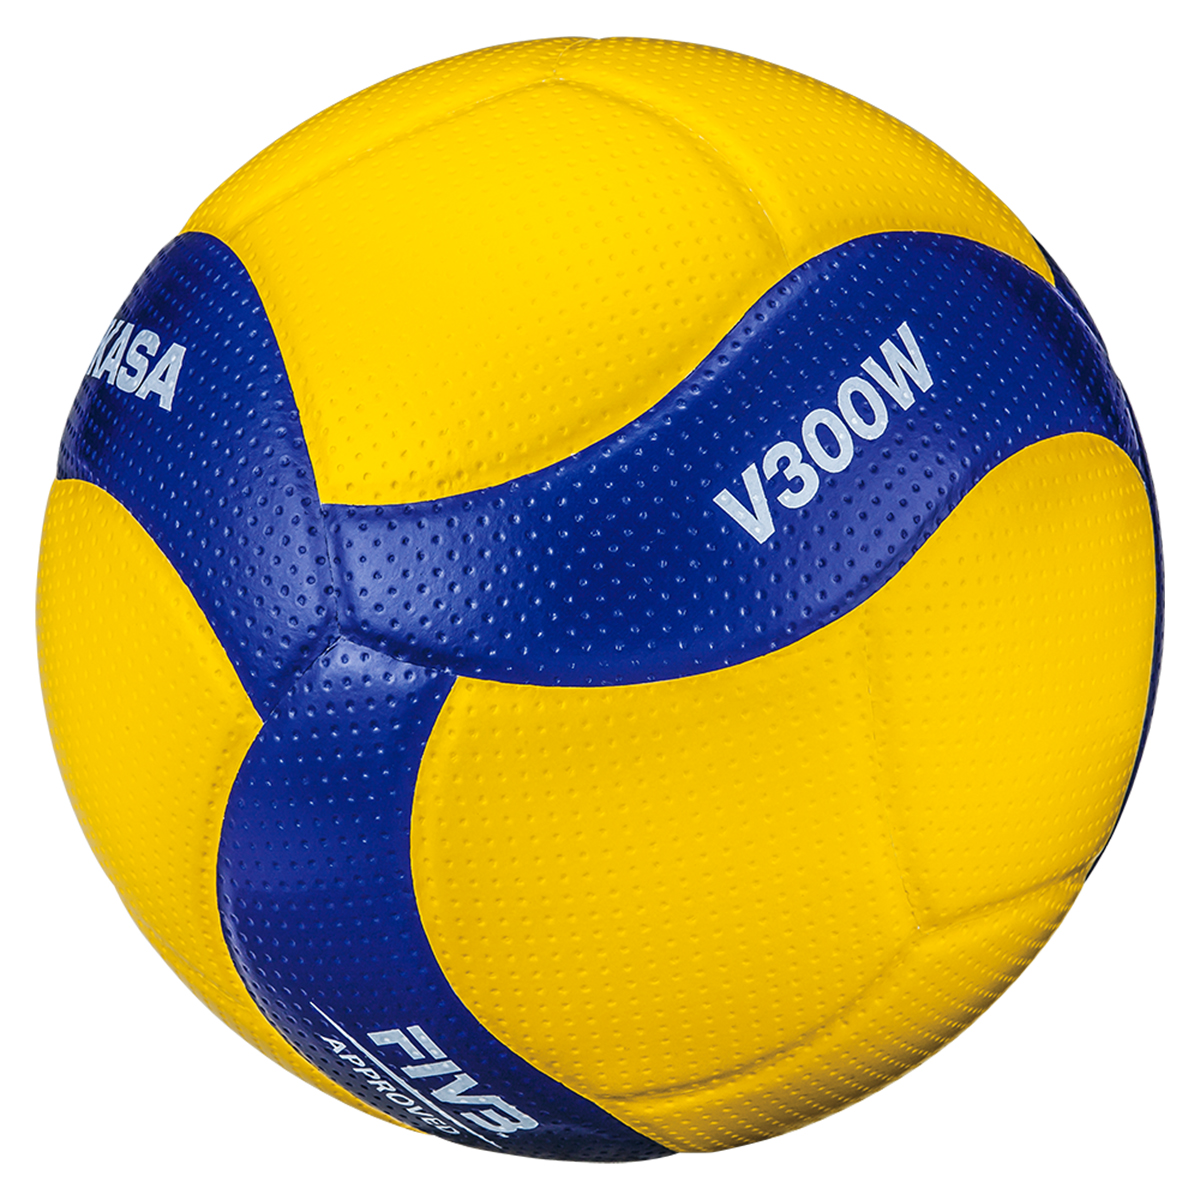 MIKASA V300W VW SERIES VOLLEYBALL SINGLE DIMPLED 18 PANEL SIZE 5, , large image number null